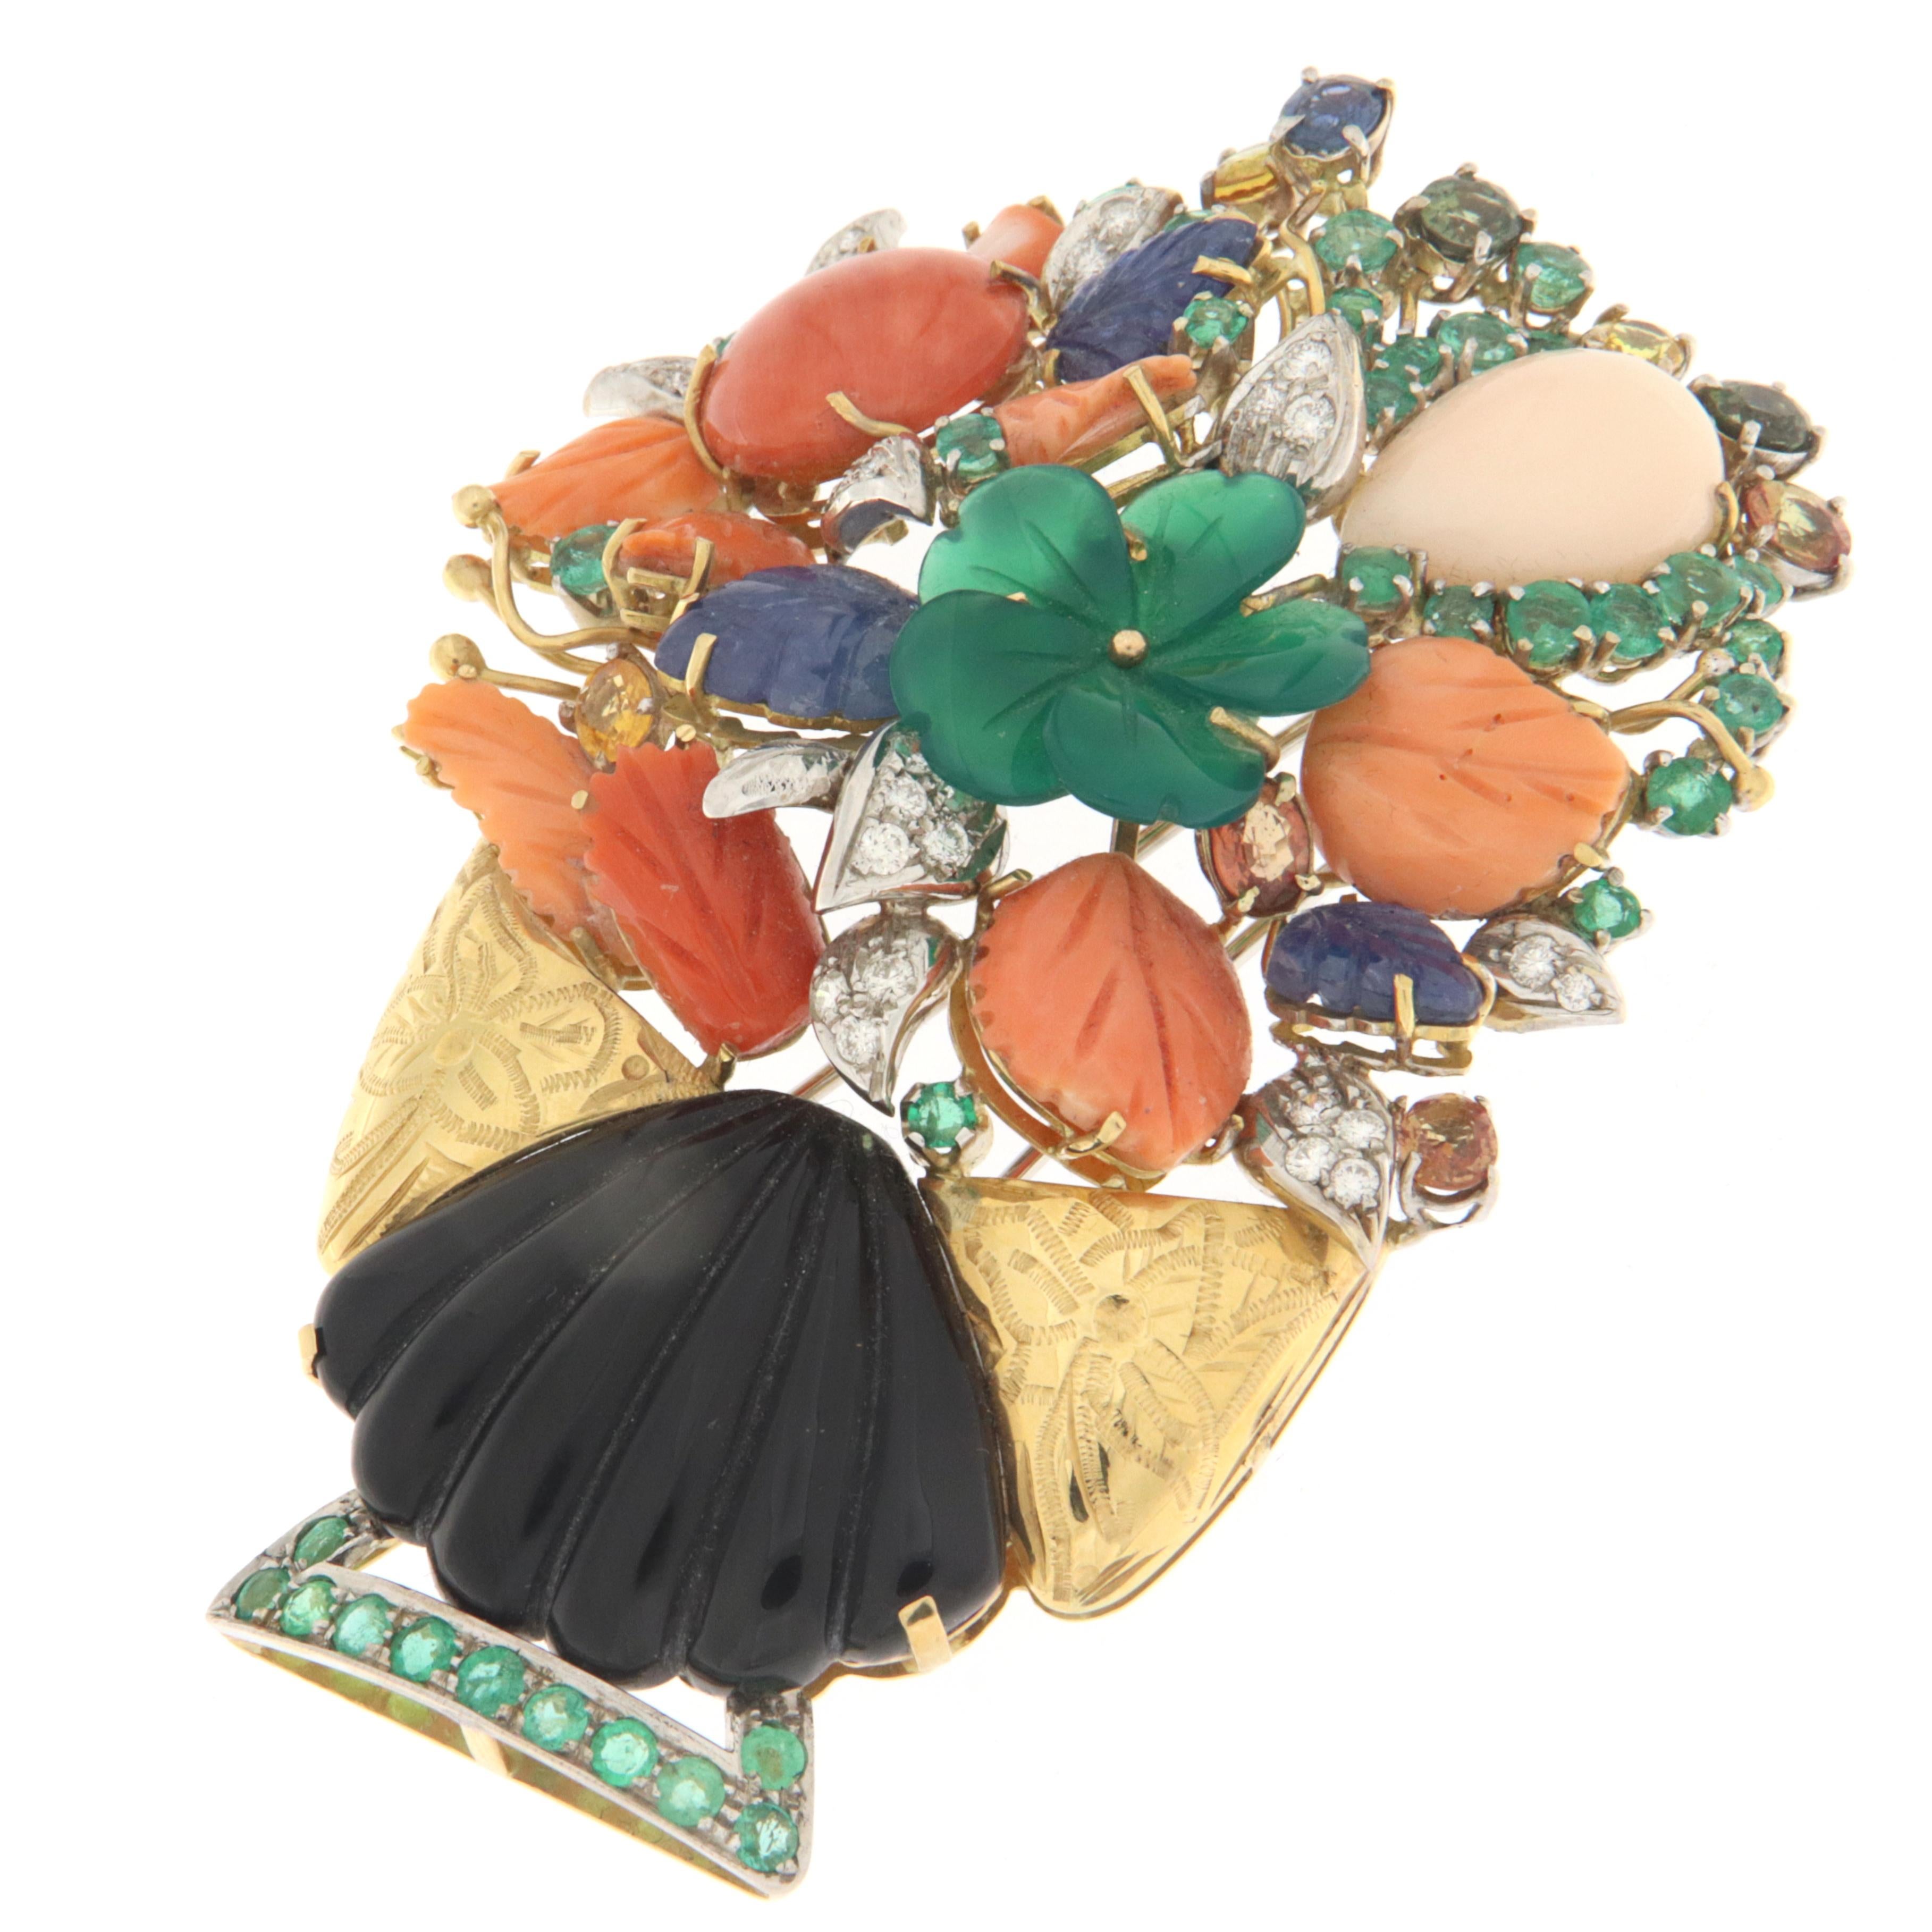 Fantastic Vase brooch in 18 karat yellow and white gold mounted with diamonds, coral,emeralds,onyx,sapphires and citrine.

Vase total weight 56.30 grams
Diamonds weight 0.80 karat
Emeralds and sapphires total weight 16.39 karat